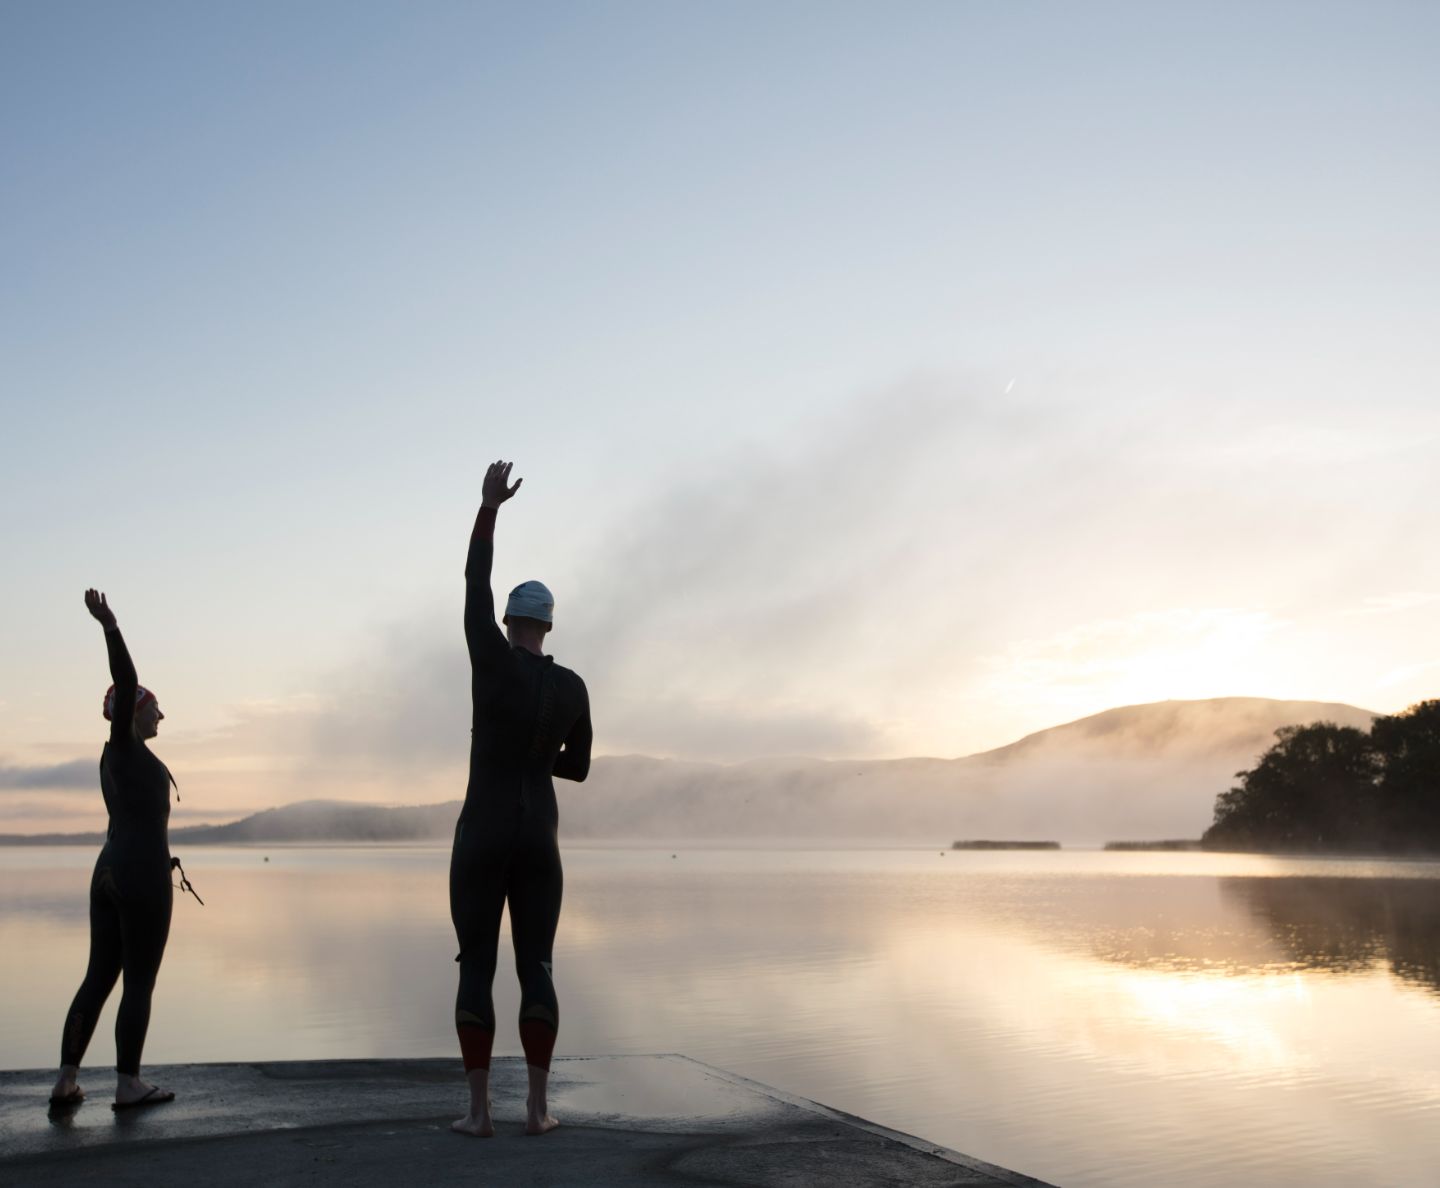 Two swimmers stretching as the sun rises over the lake